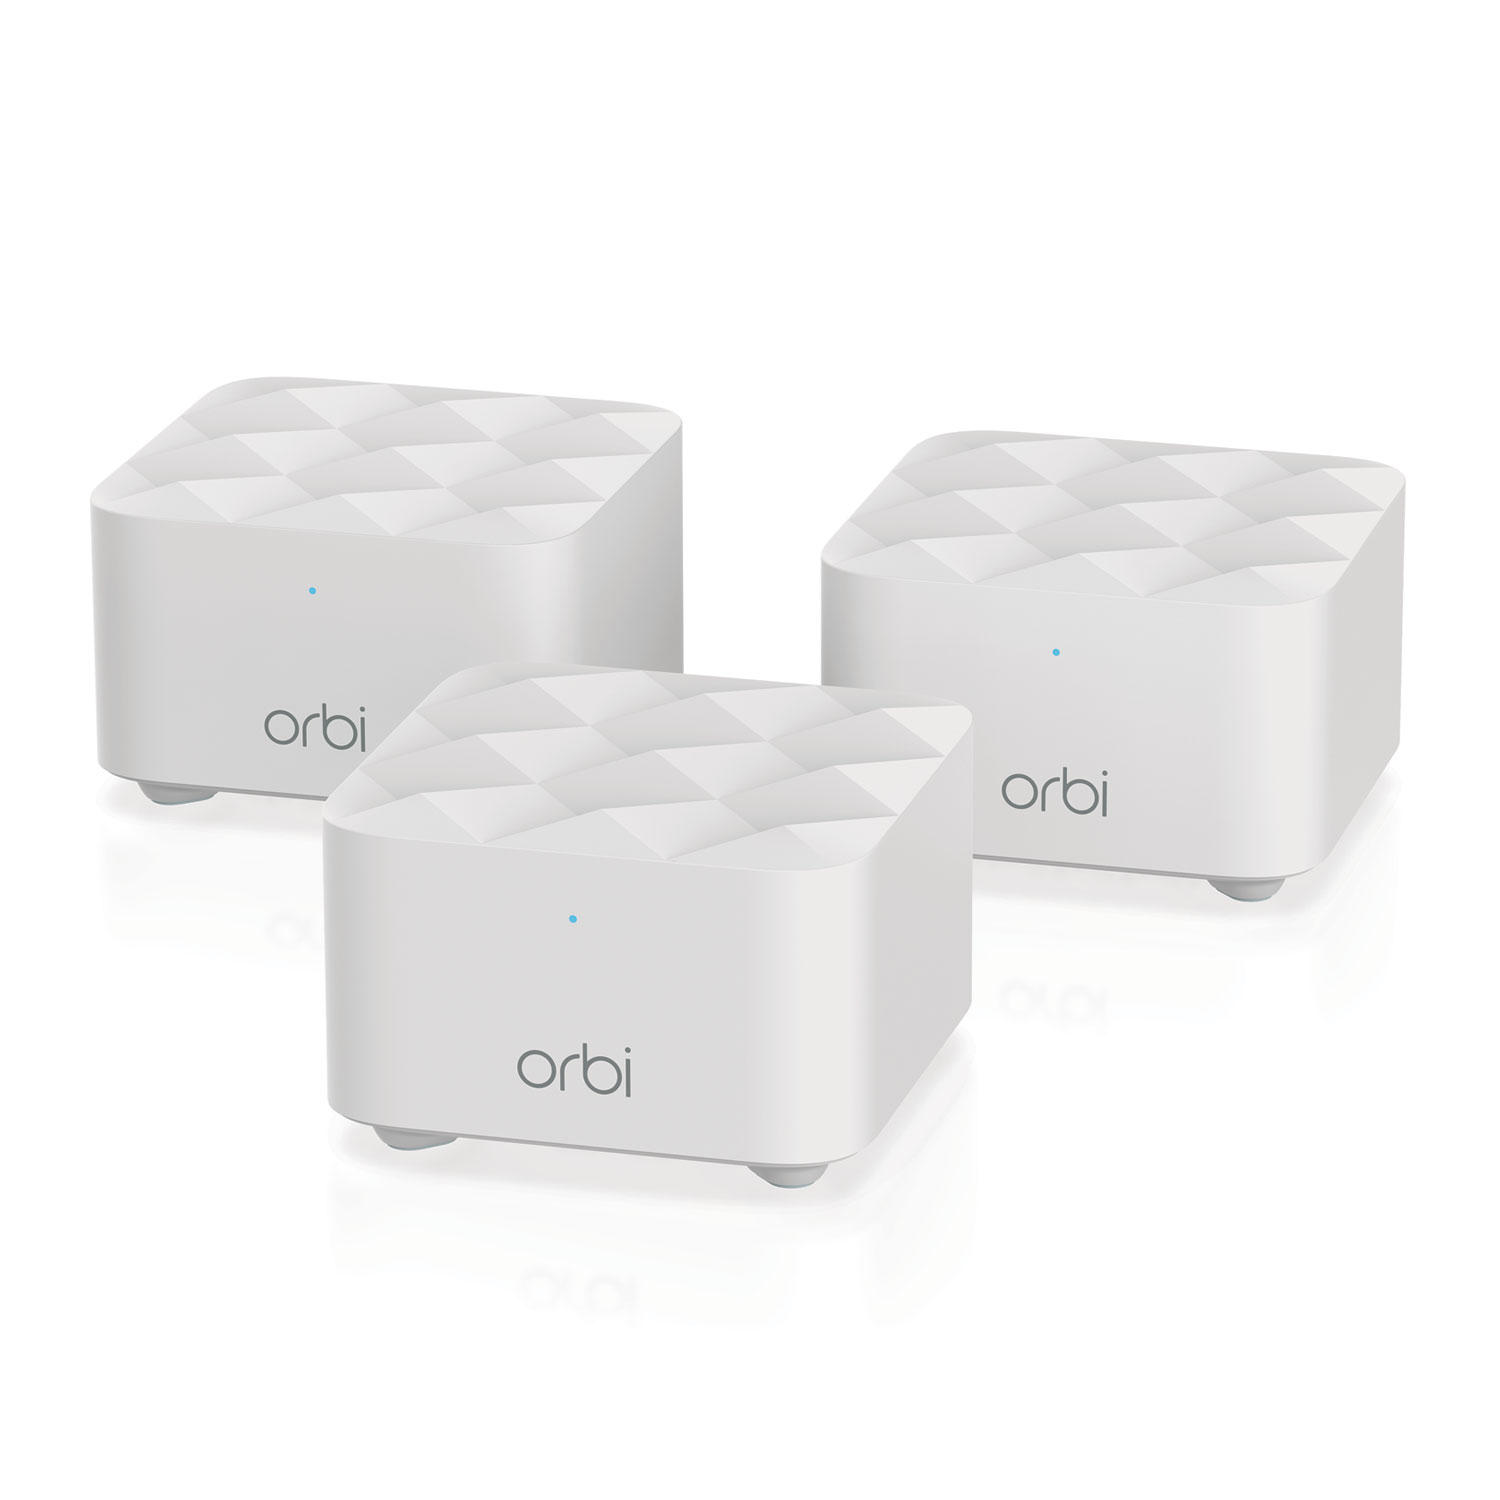 Orbi Mesh Dual-Wi-Fi Router and Satellite System By NETGEAR – 3 Pack